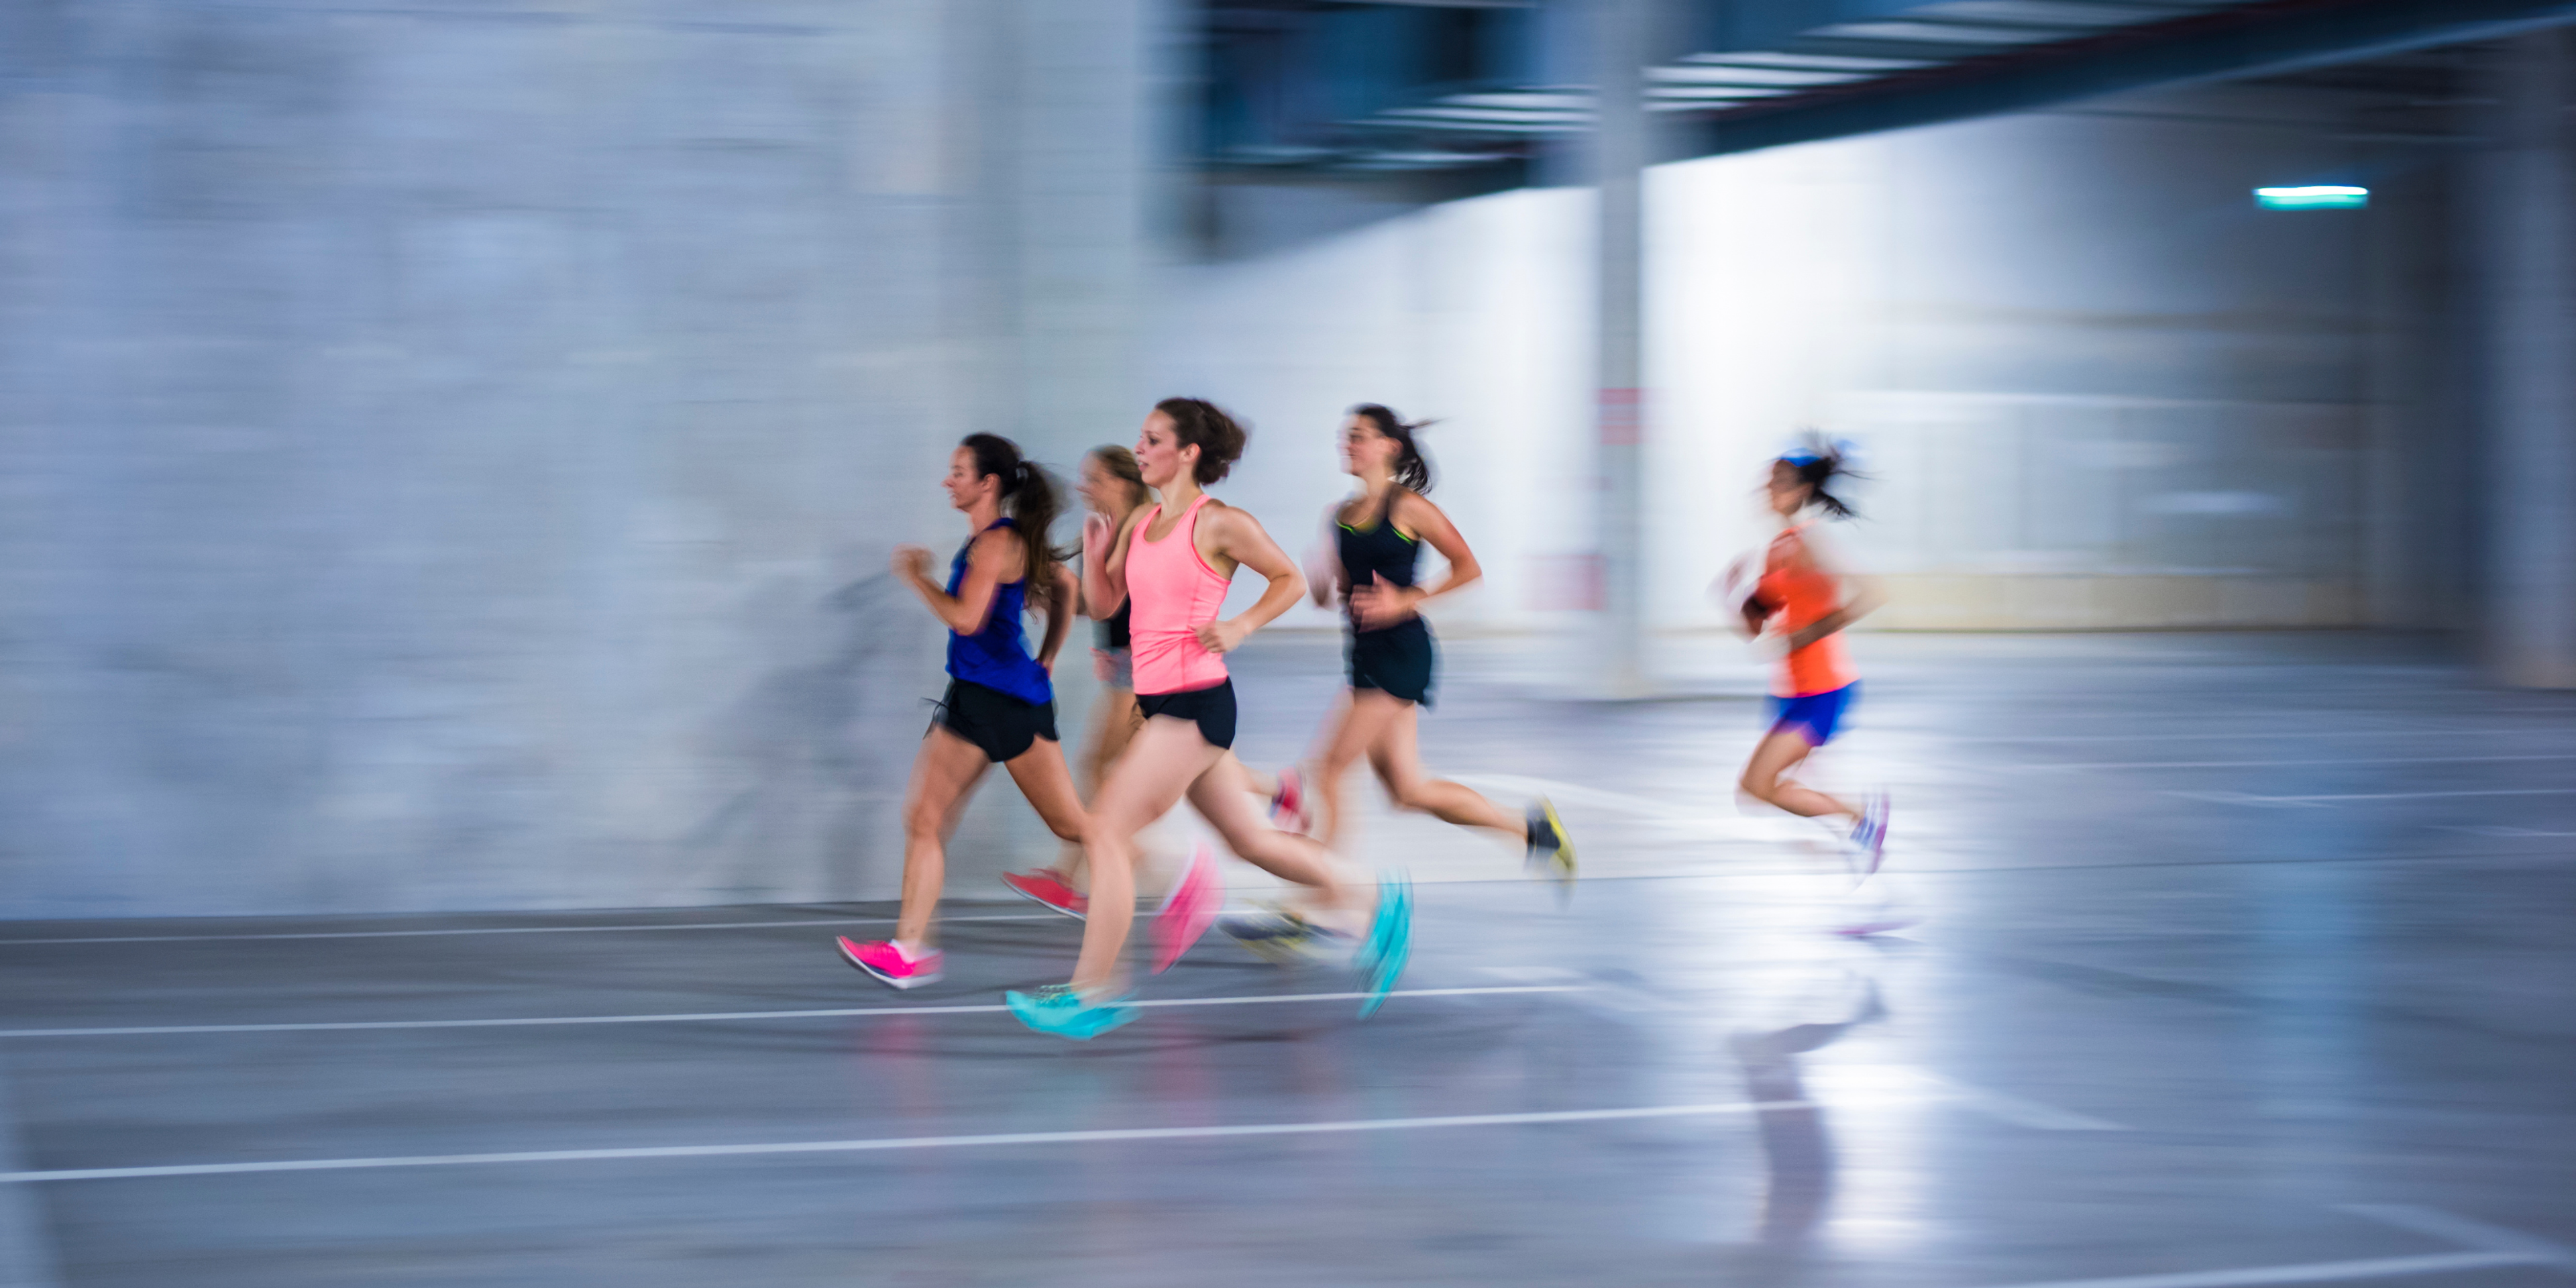 Assess your running style and adjust it only if needed to prevent overuse running injuries.